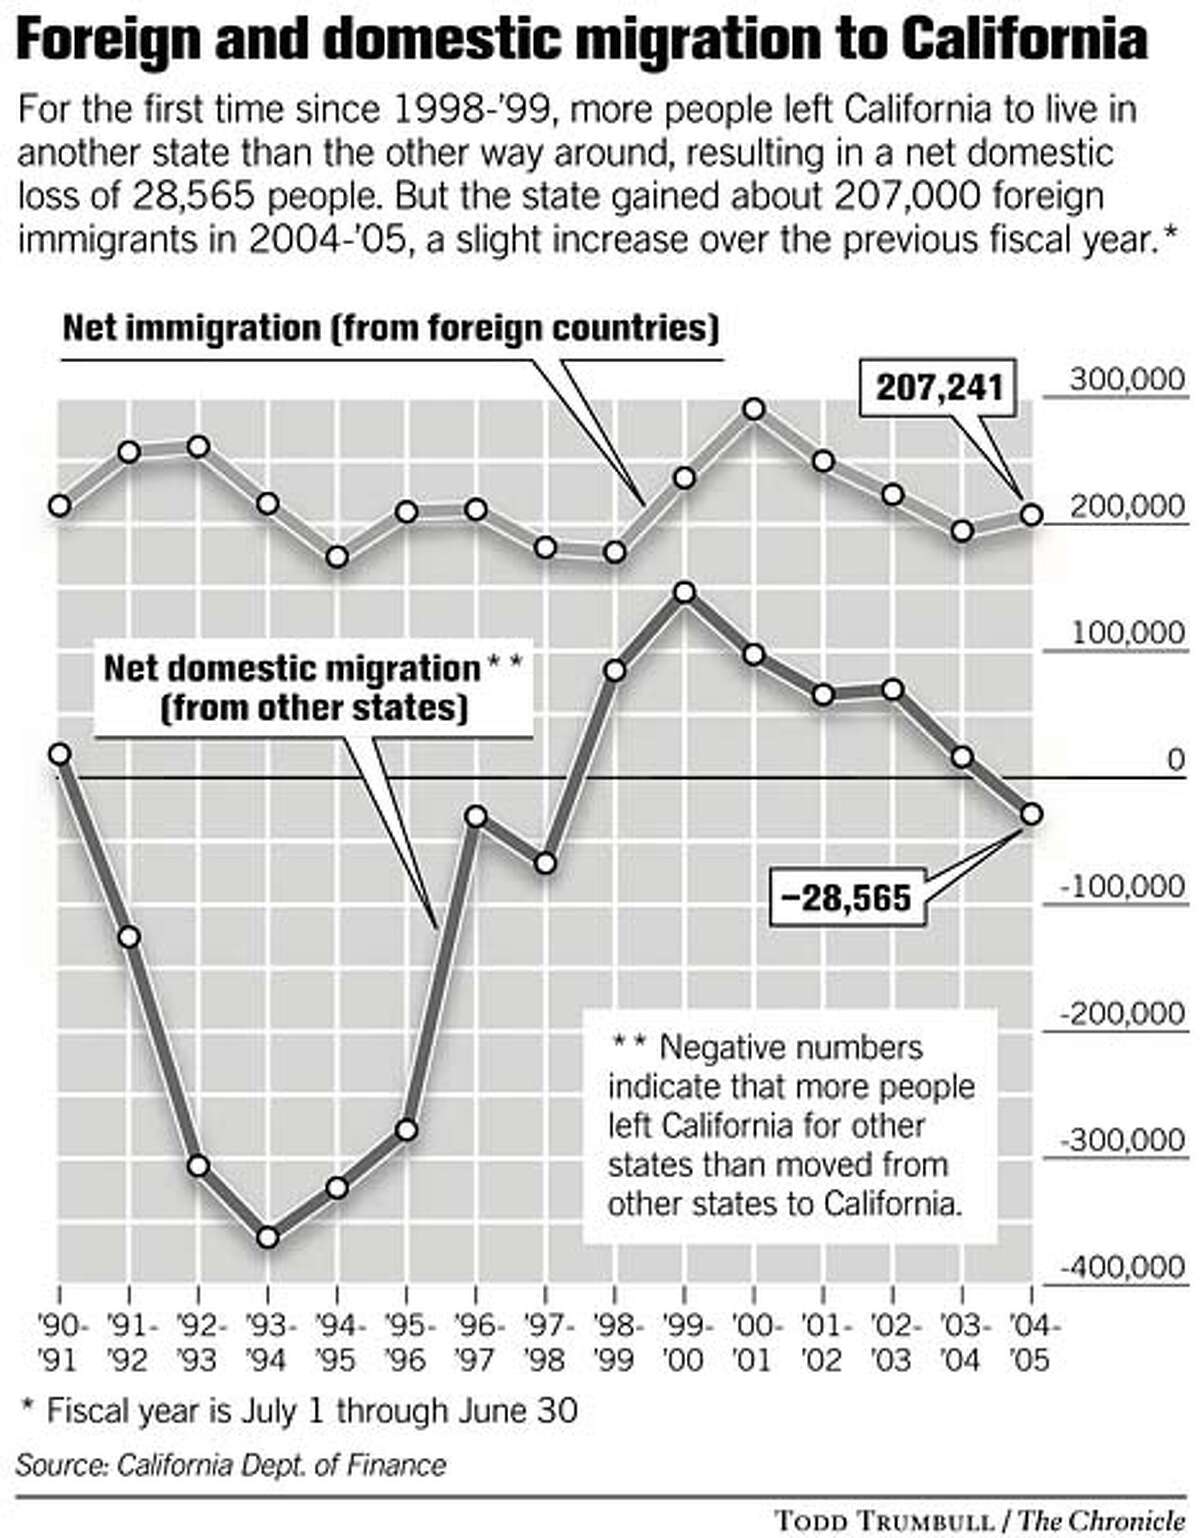 CALIFORNIA / More people now departing state than moving here